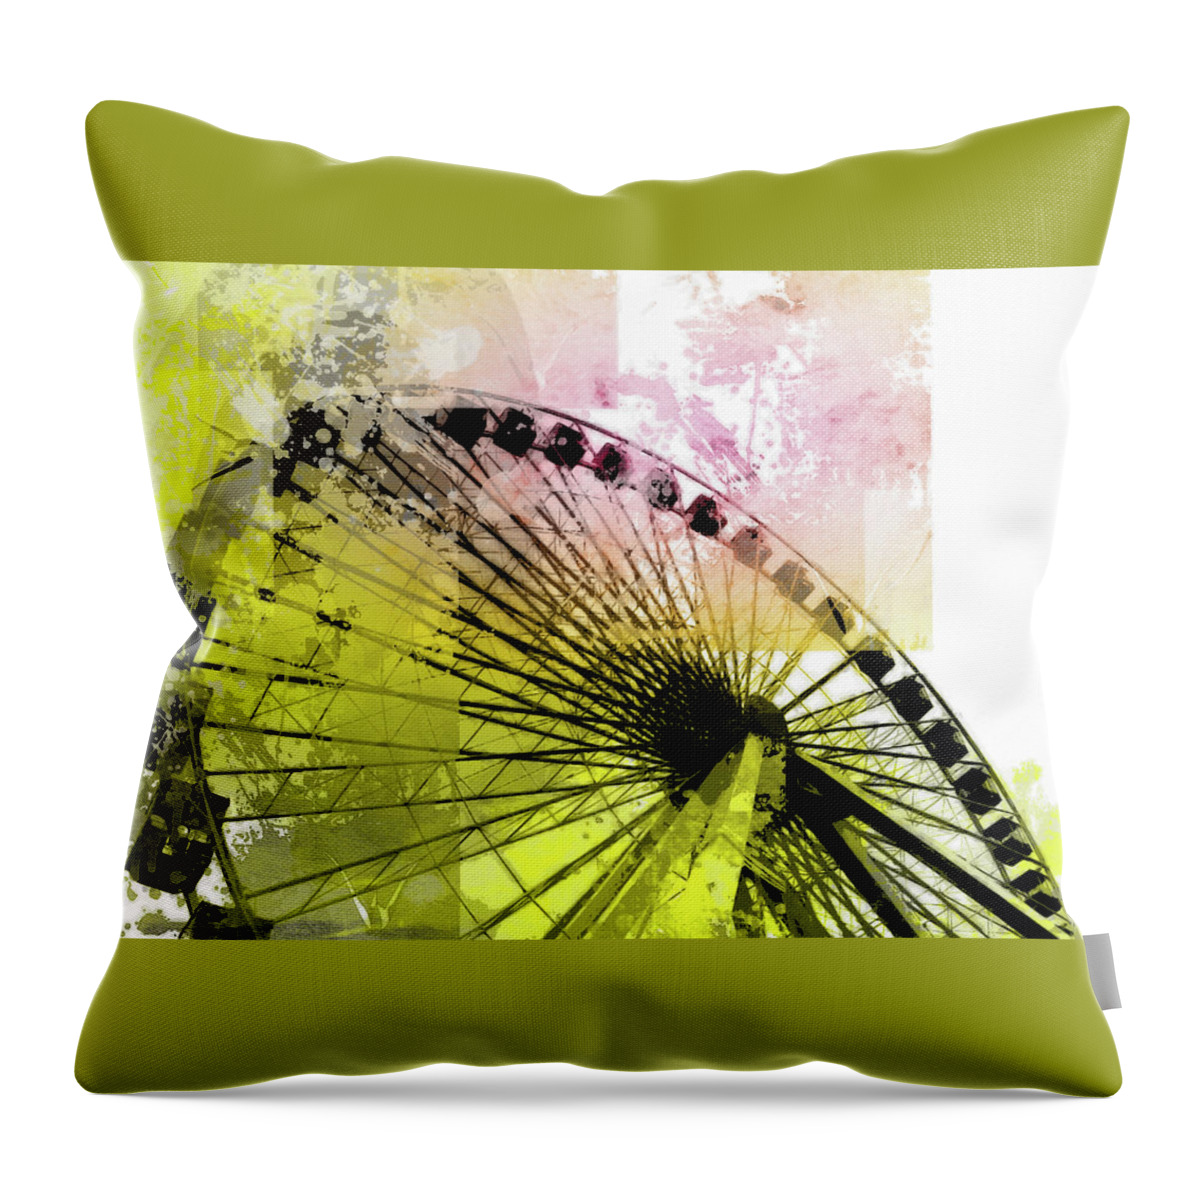 Louvre Throw Pillow featuring the mixed media Ferris 11 by Priscilla Huber